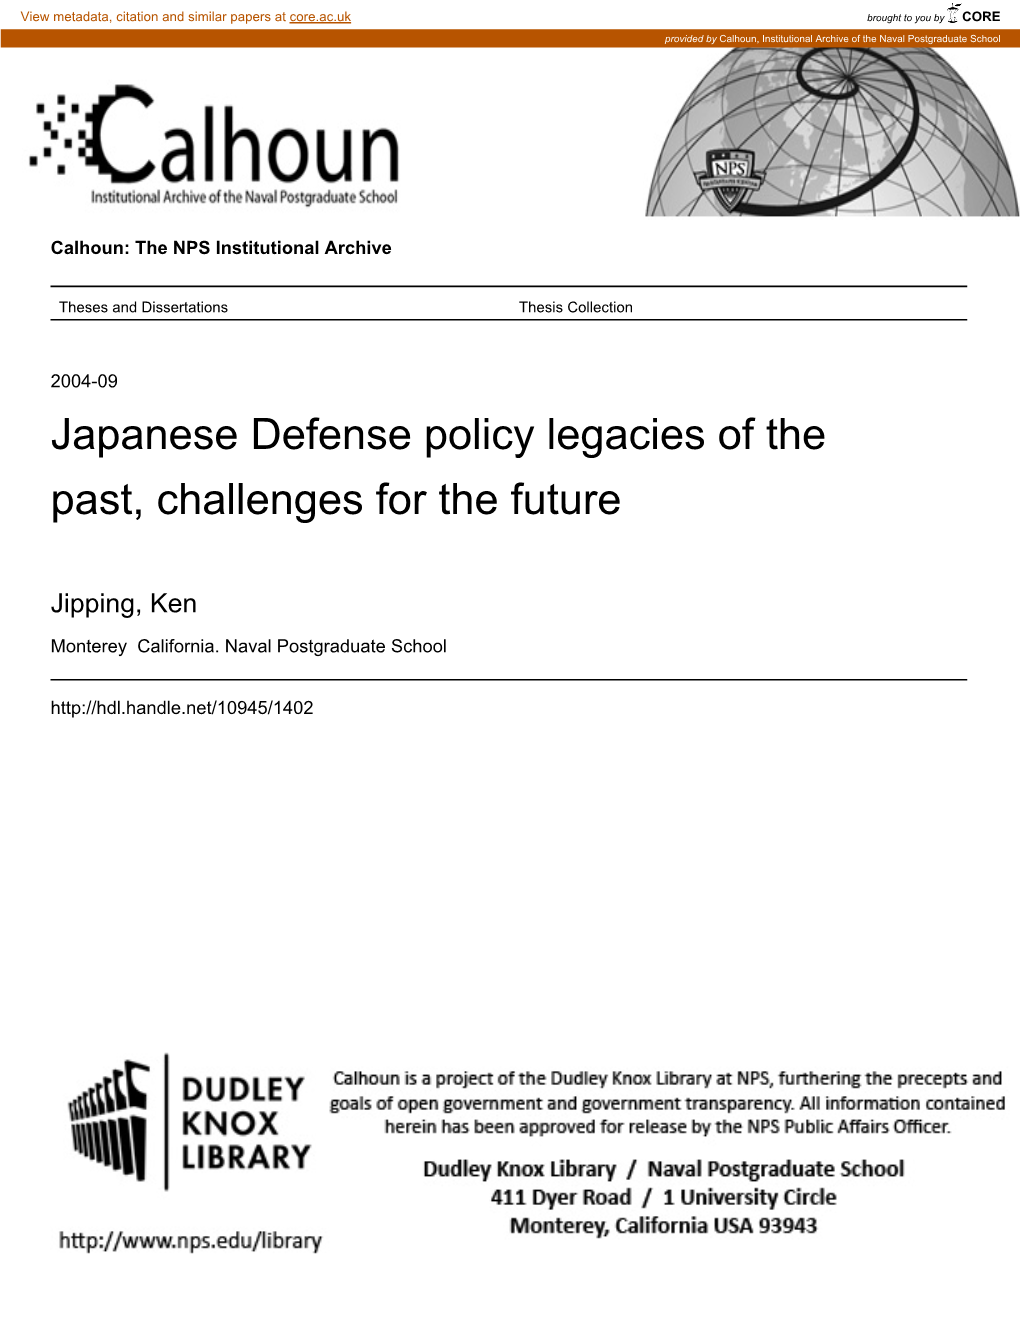 Japanese Defense Policy Legacies of the Past, Challenges for the Future